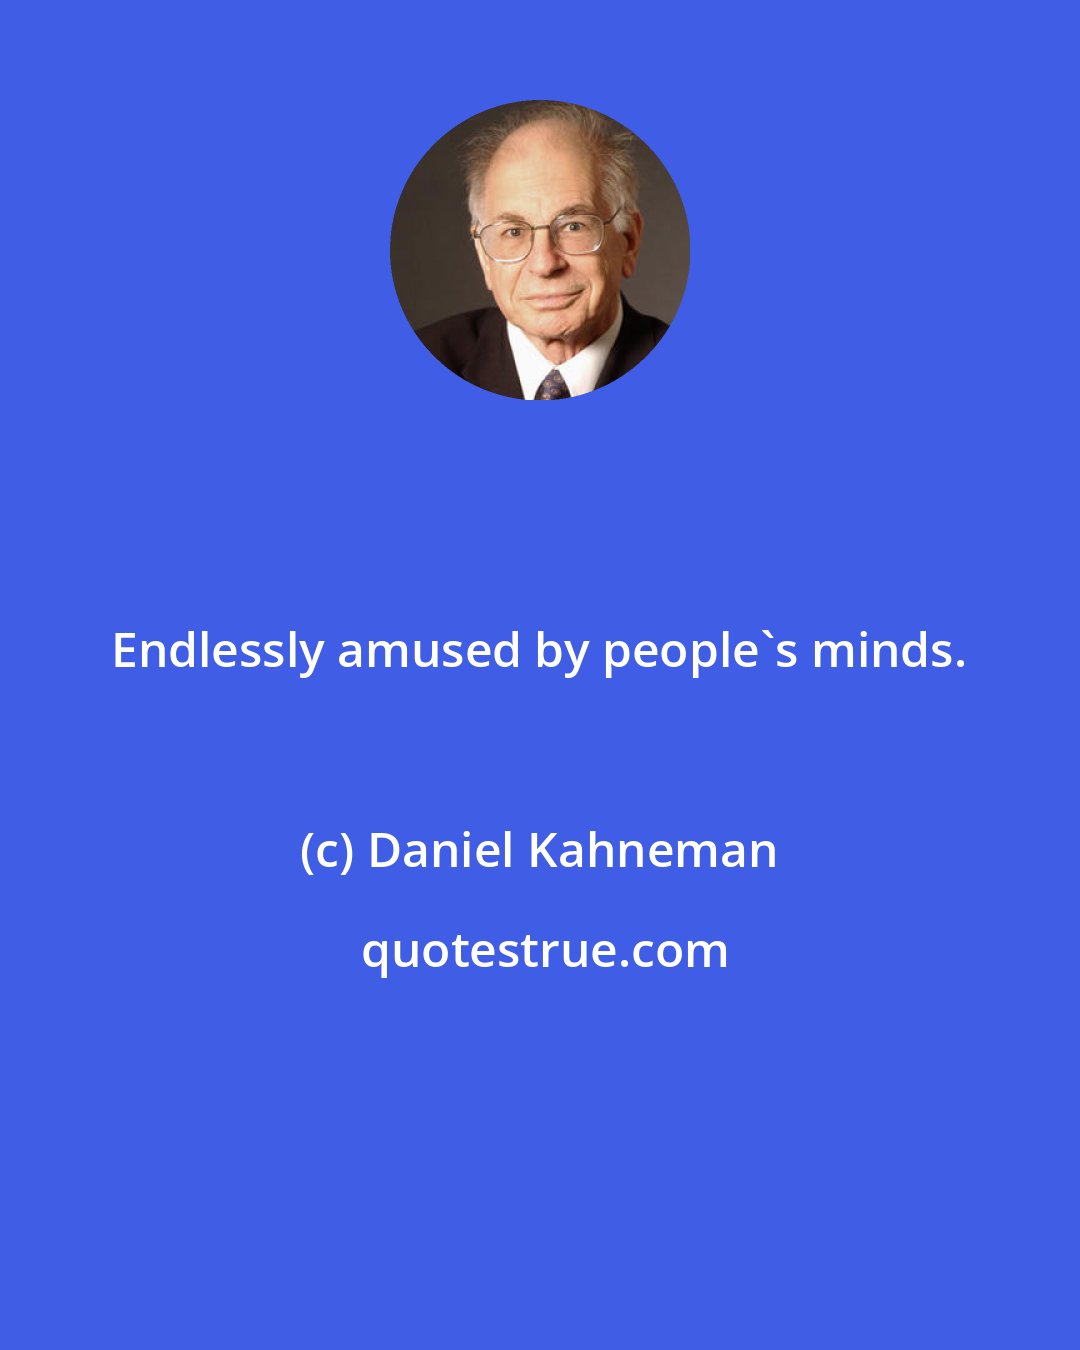 Daniel Kahneman: Endlessly amused by people's minds.